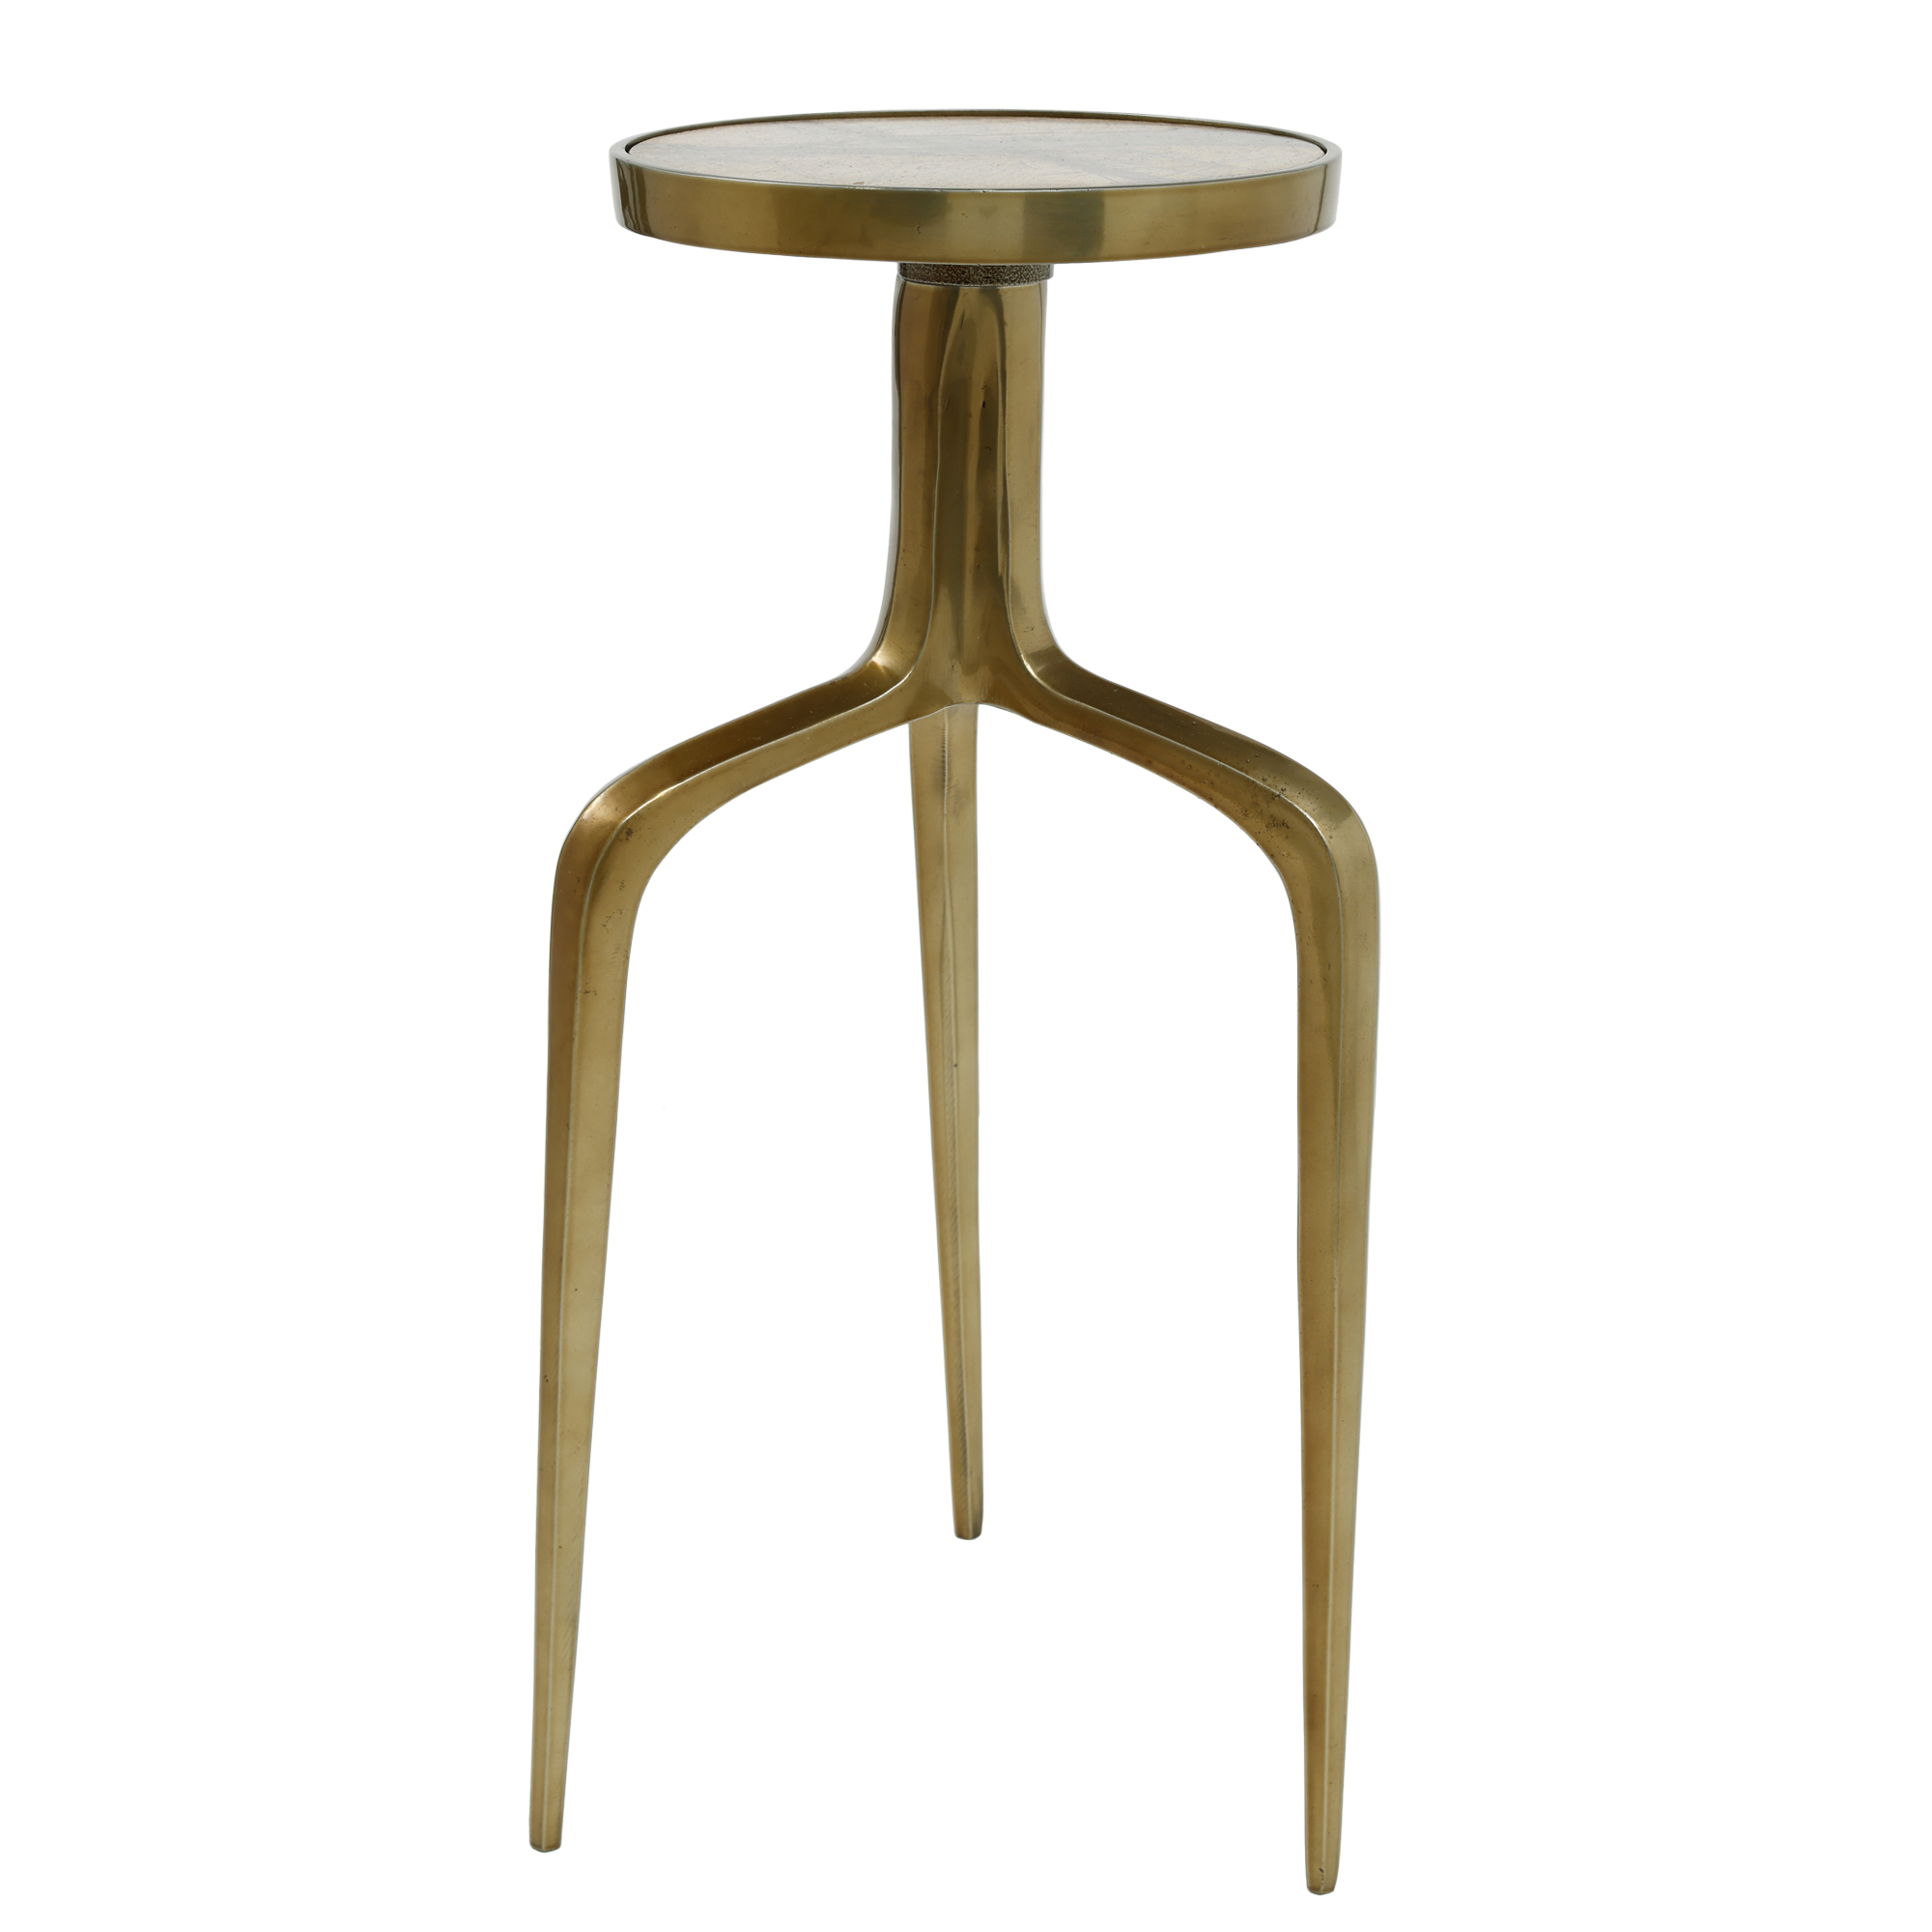 Enter Brass Marble alu sidetable brown top round S